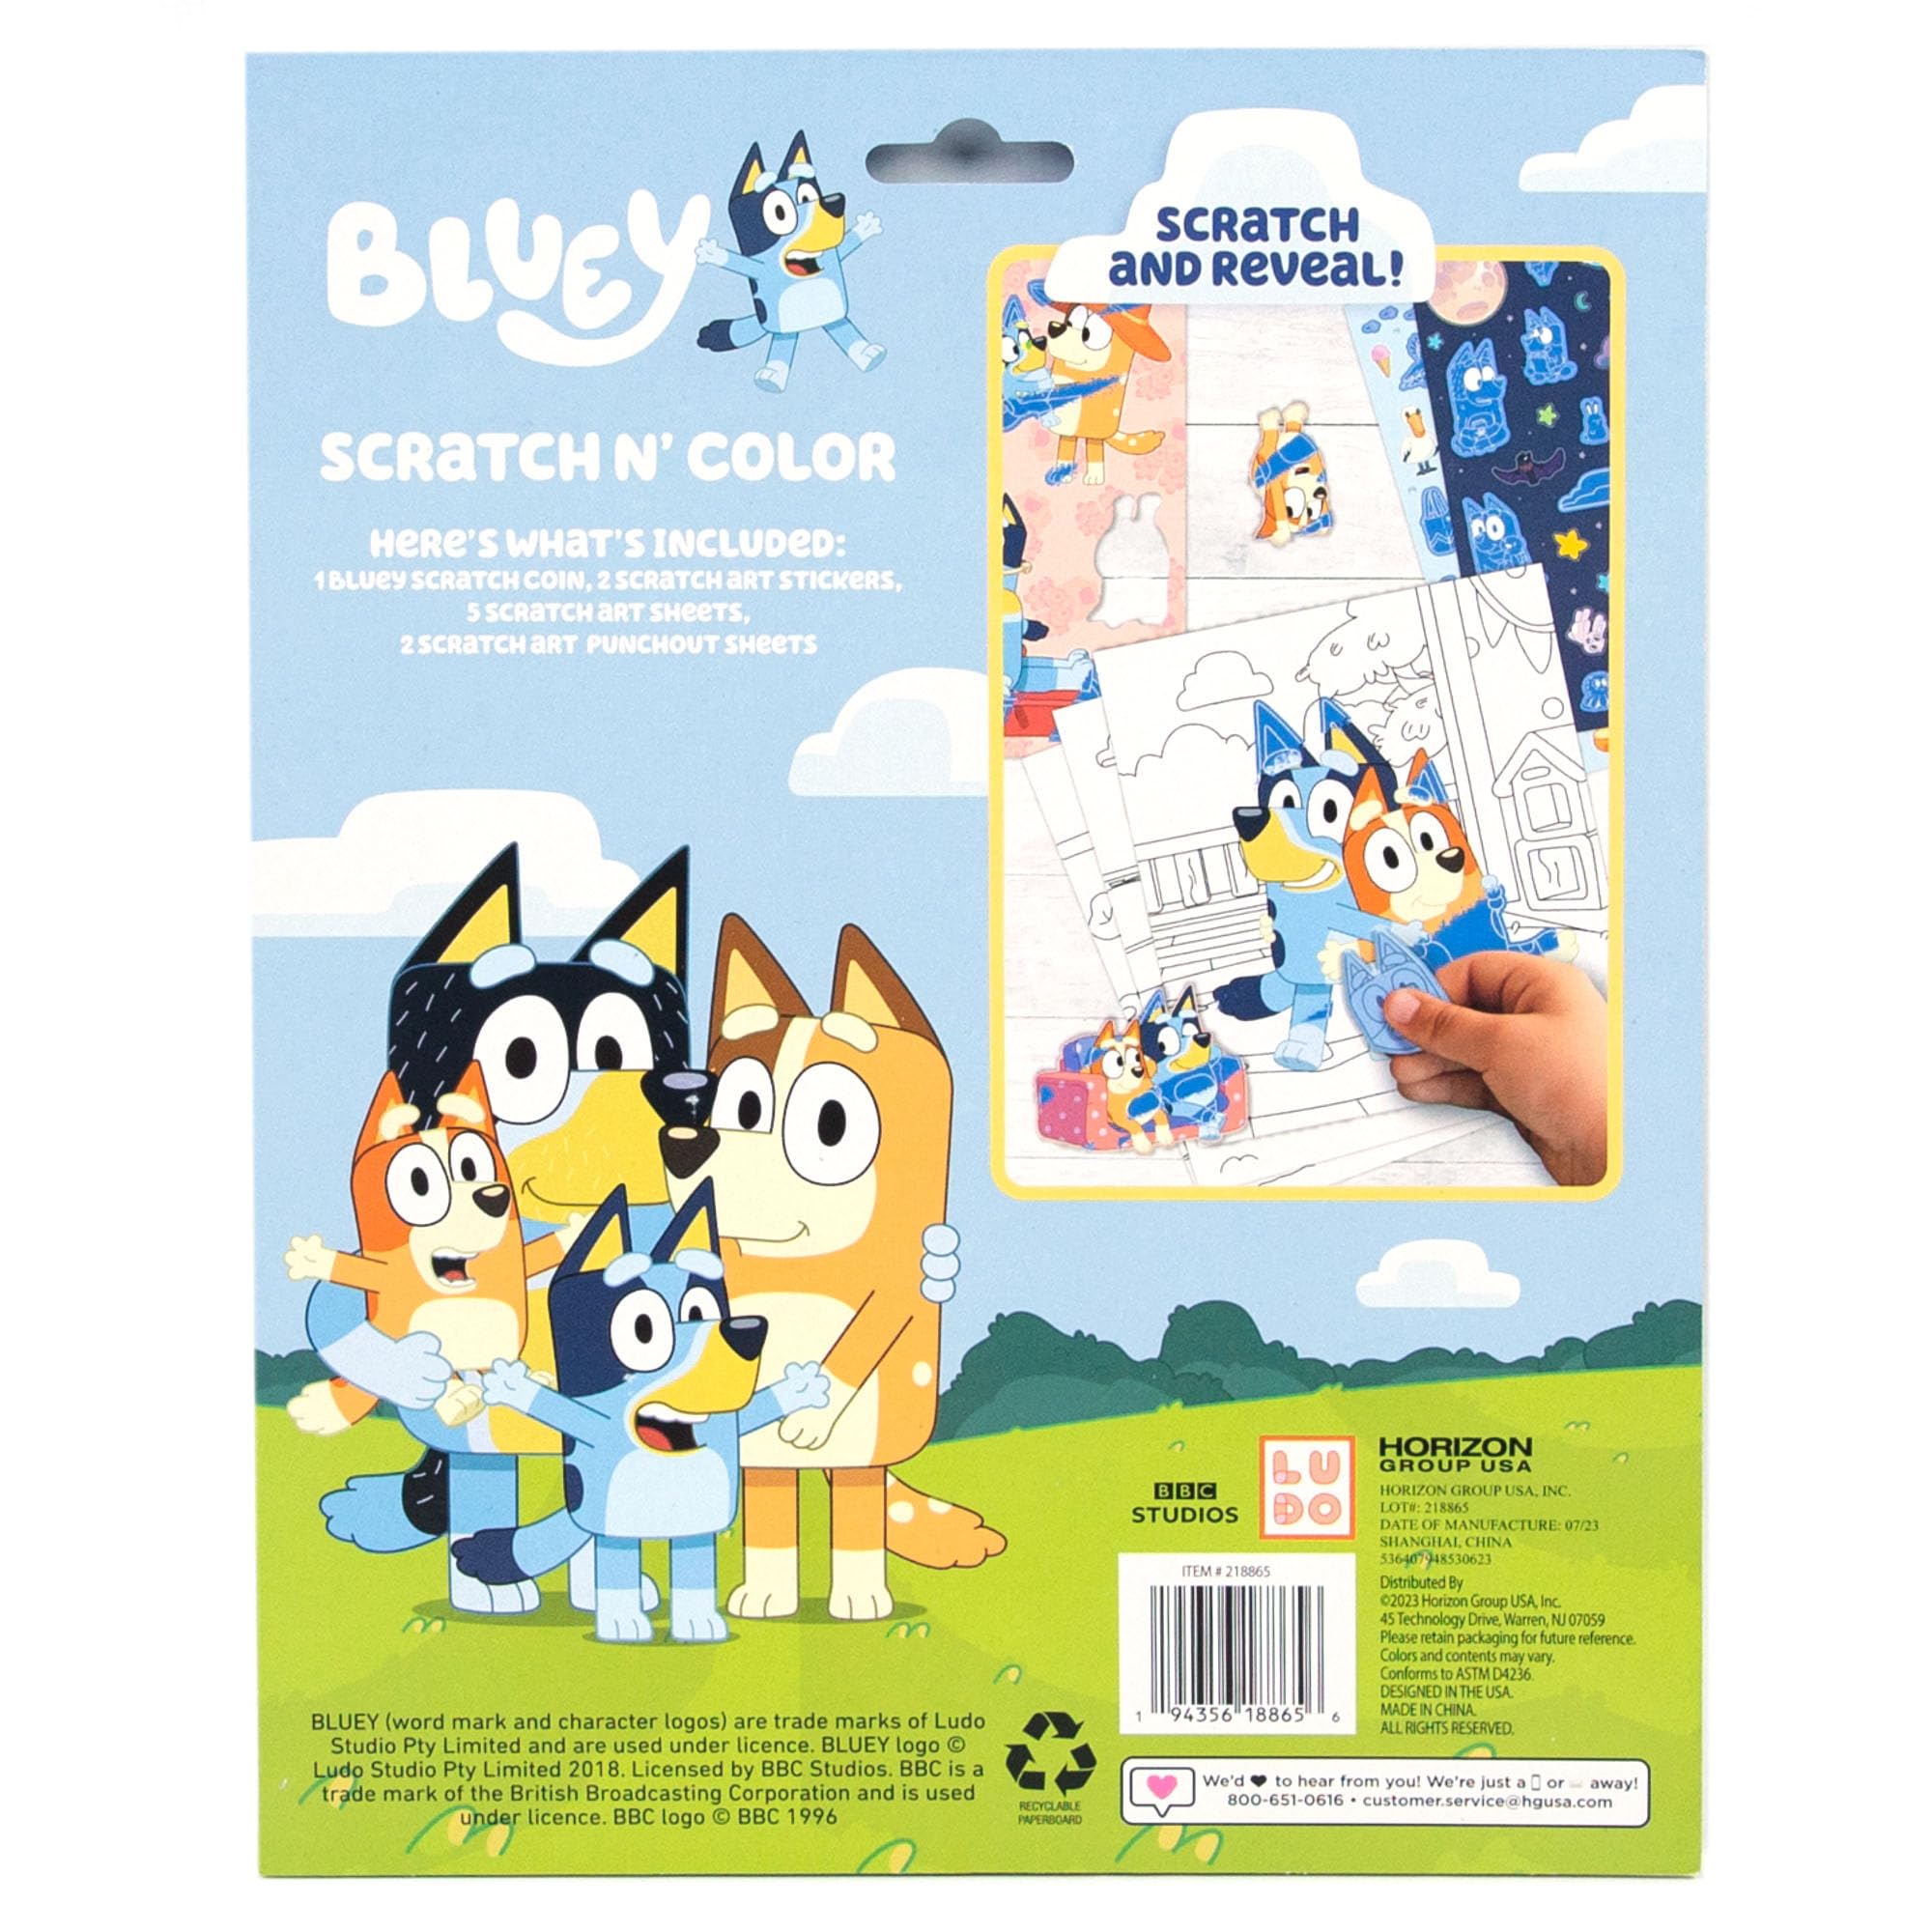 Bluey Scratch ‘n Color Pad, 9-Page Activity Coloring Book, Includes Scratch Art, Stickers for Kids, Toys, On The Go Activity Playset, Toys for Toddlers 1-3, Great Gift for Kids Ages 3 & Up